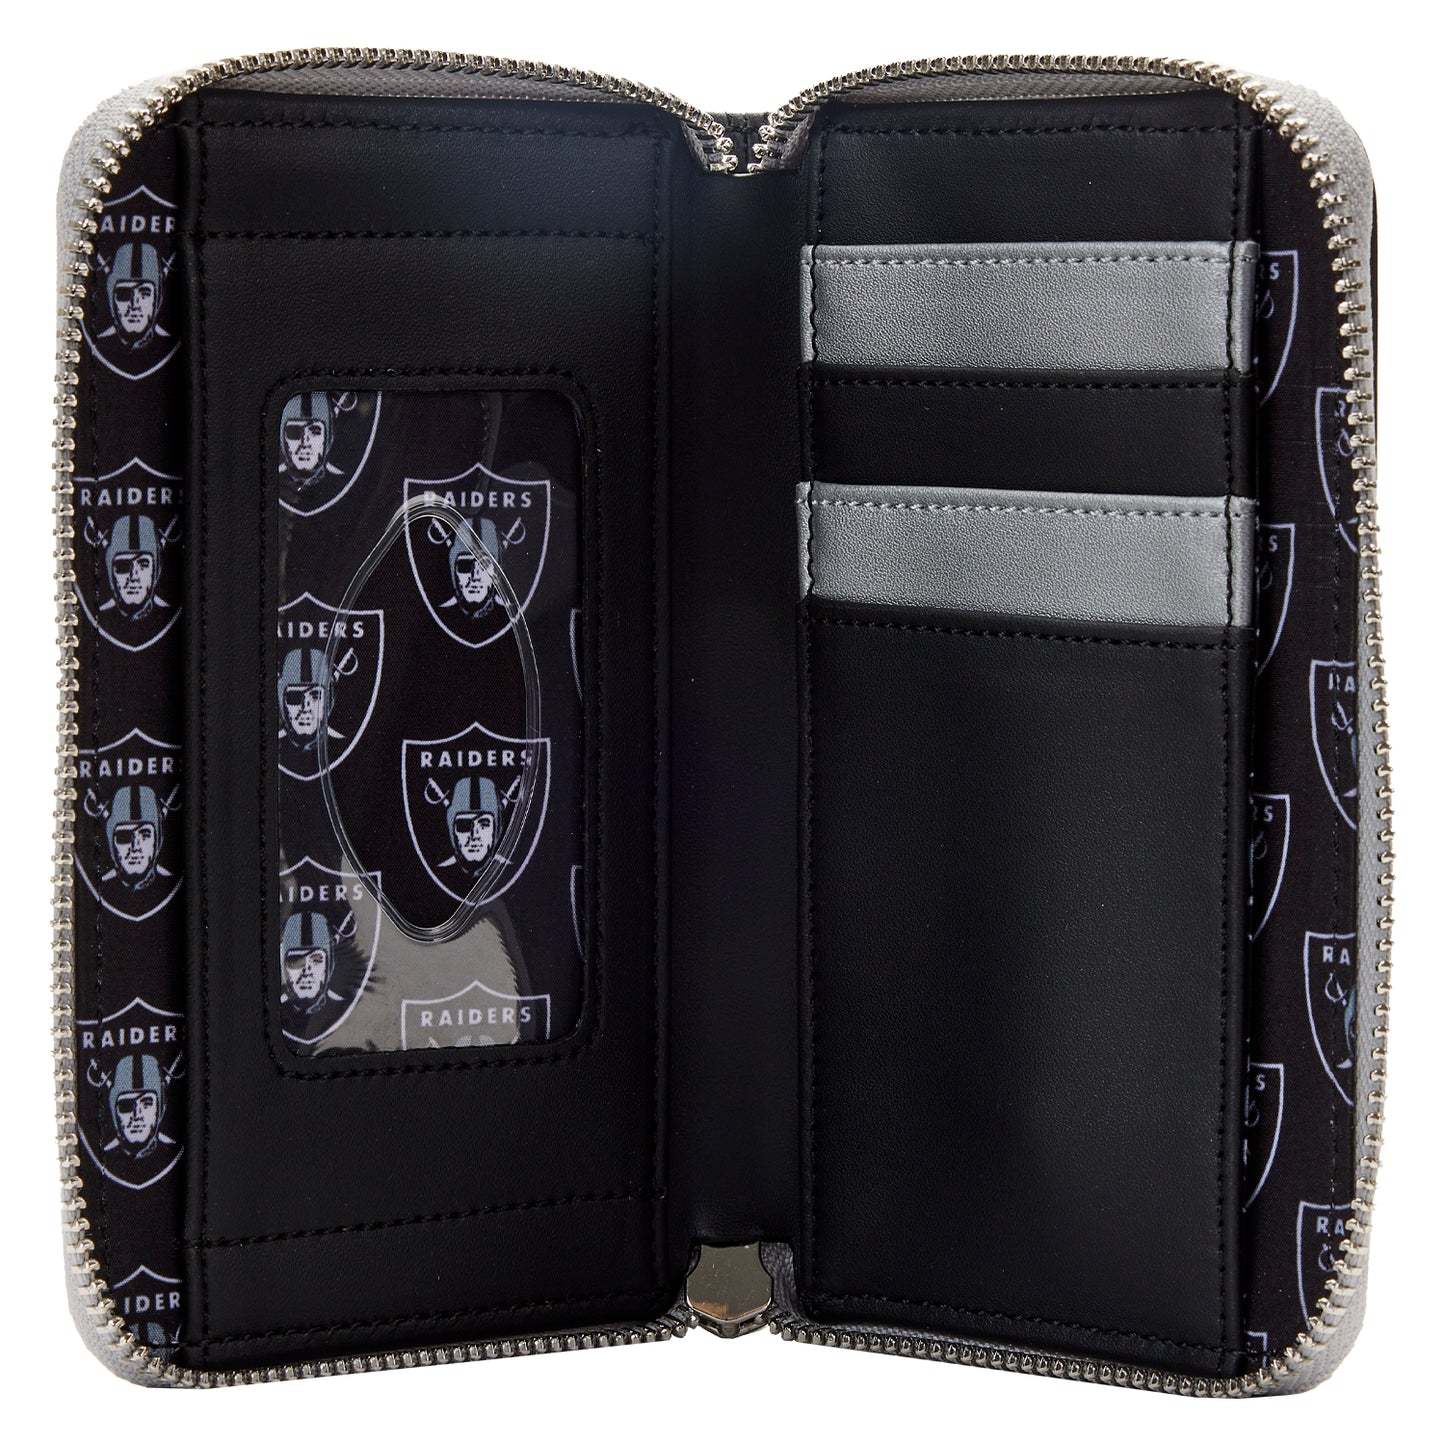 Loungefly NFL Las Vegas Raiders Patches Zip Around Wallet